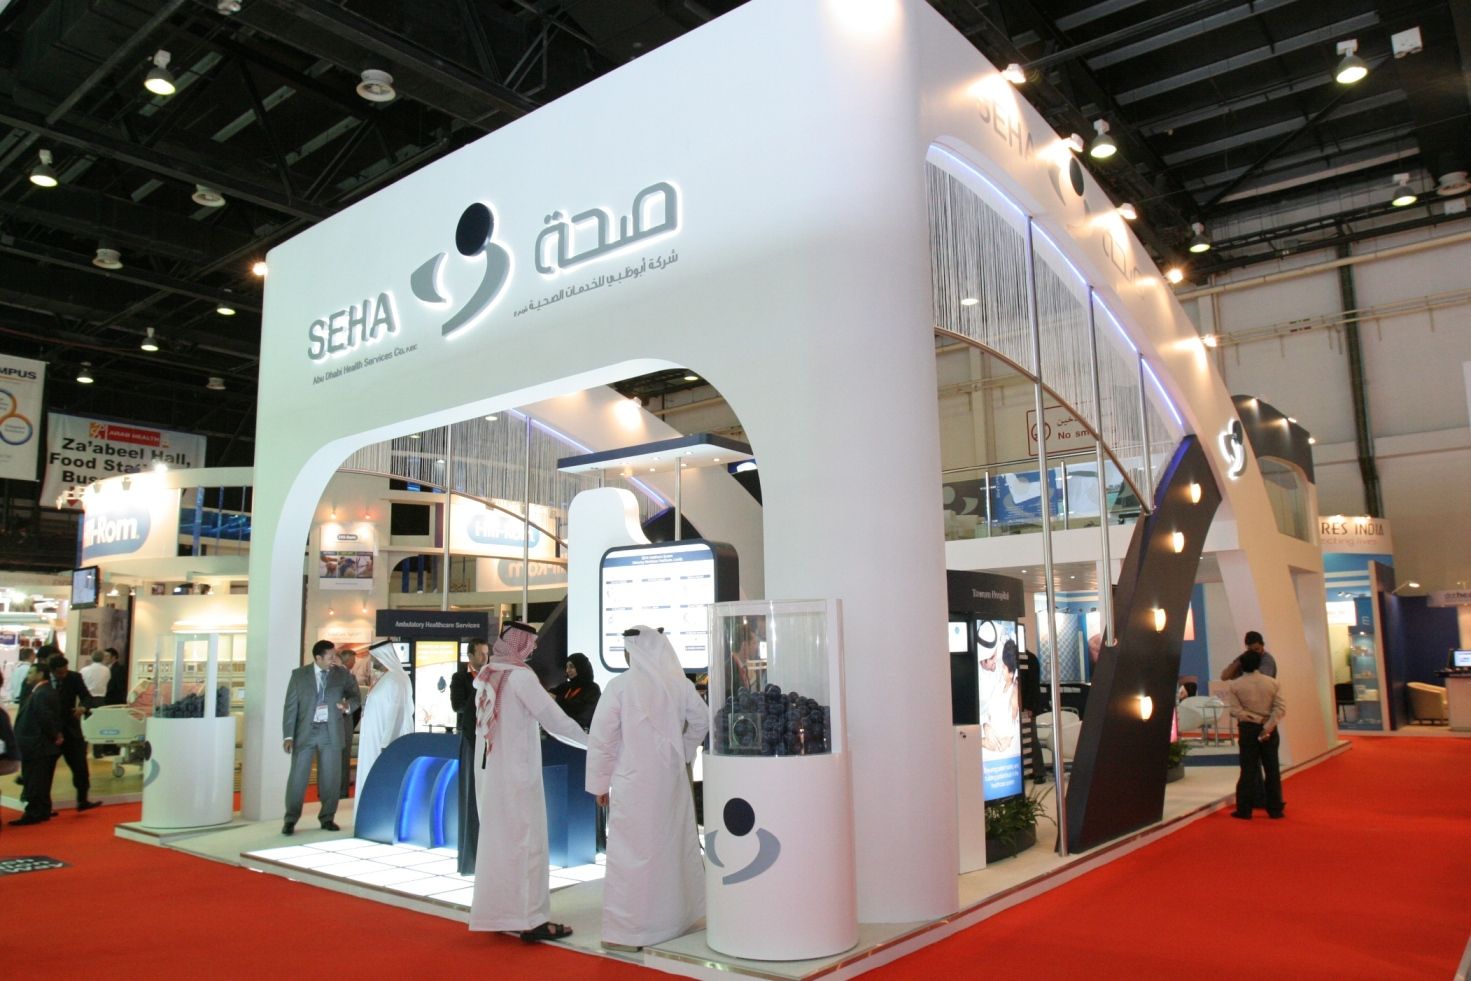 Learn How To Get Exhibition Stands In Dubai That Will Benefit You